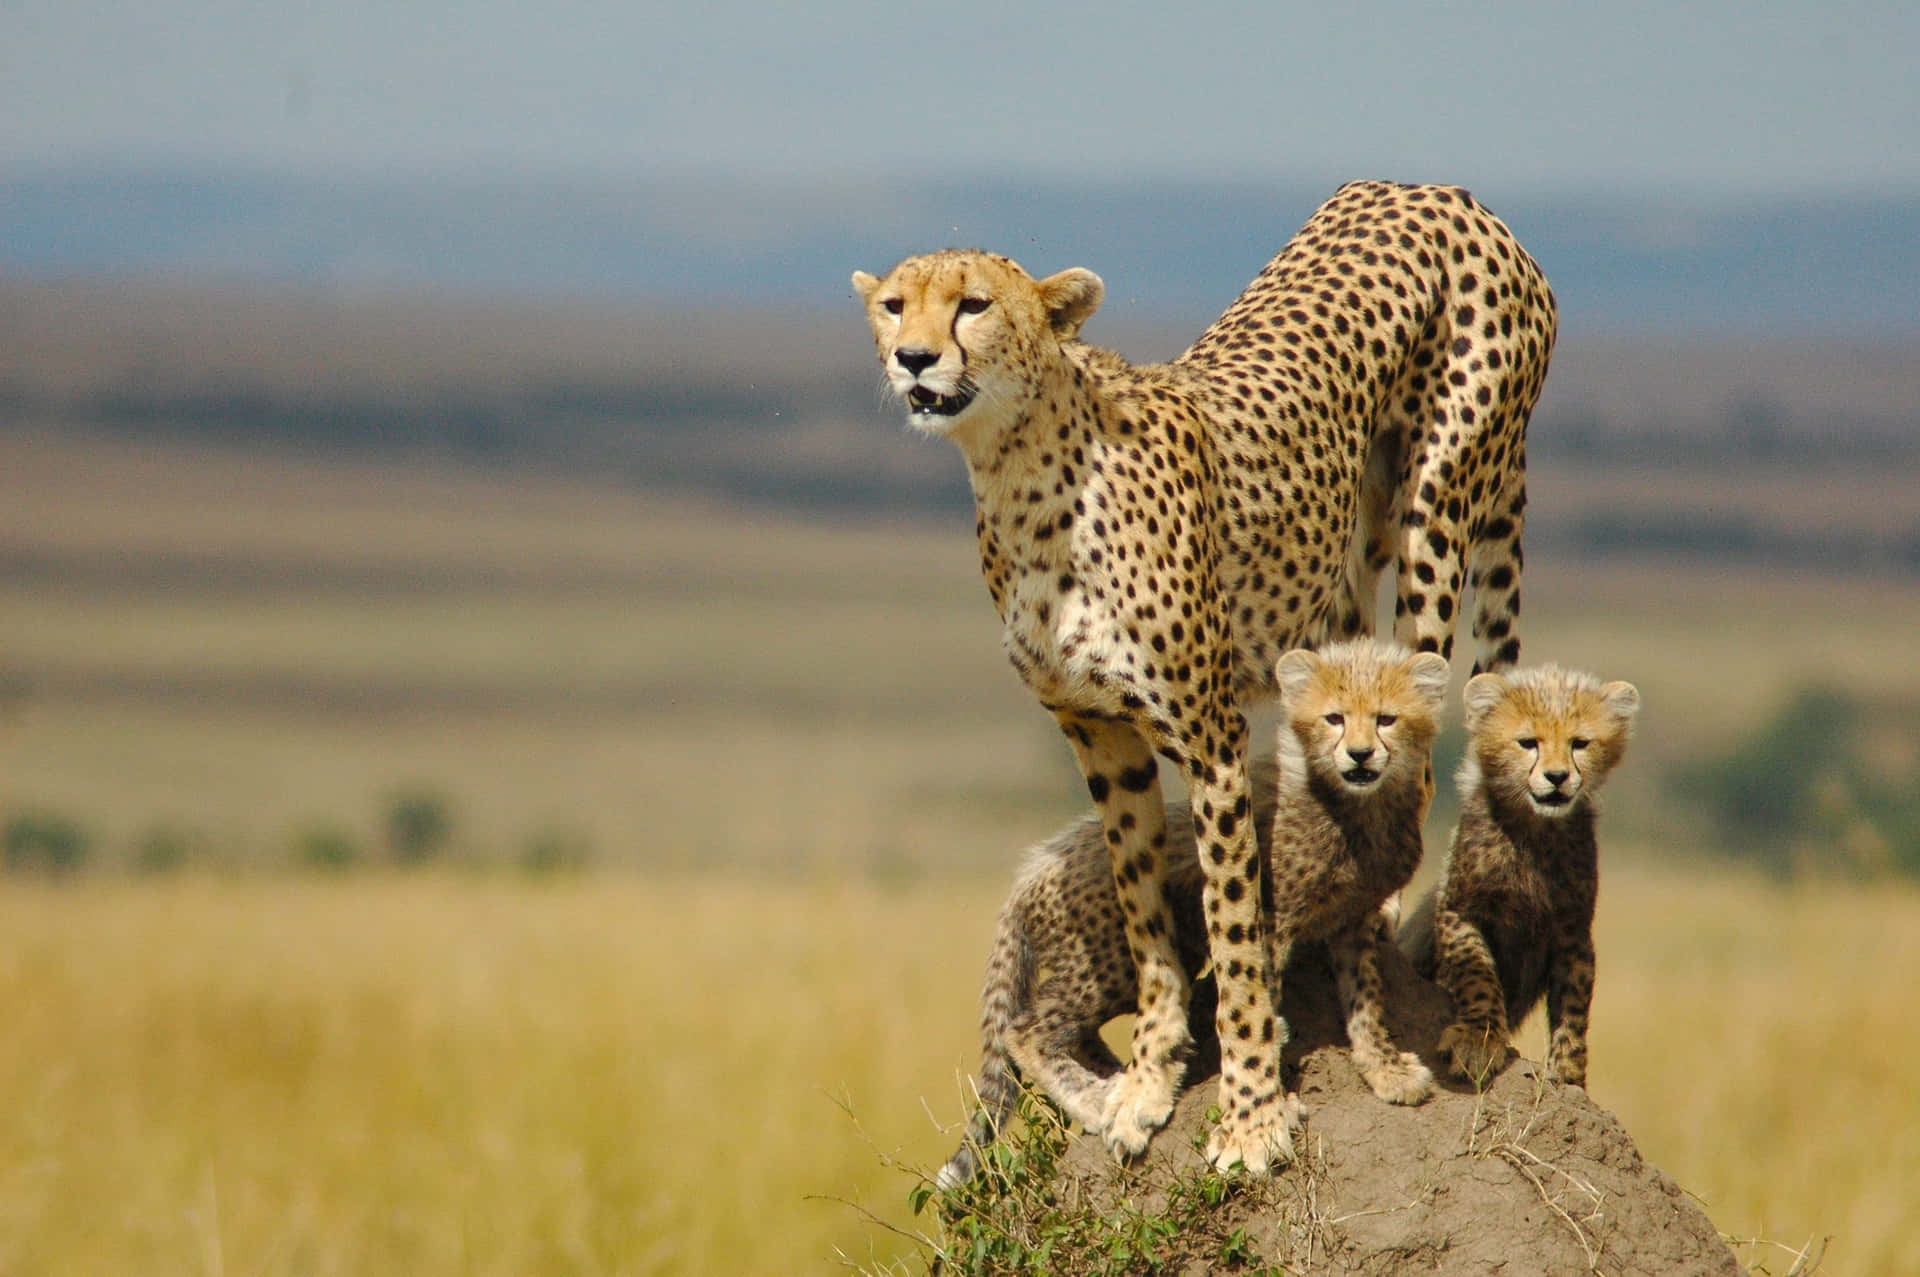 Enjoy the beauty of the cheetah in vivid, high-resolution detail Wallpaper